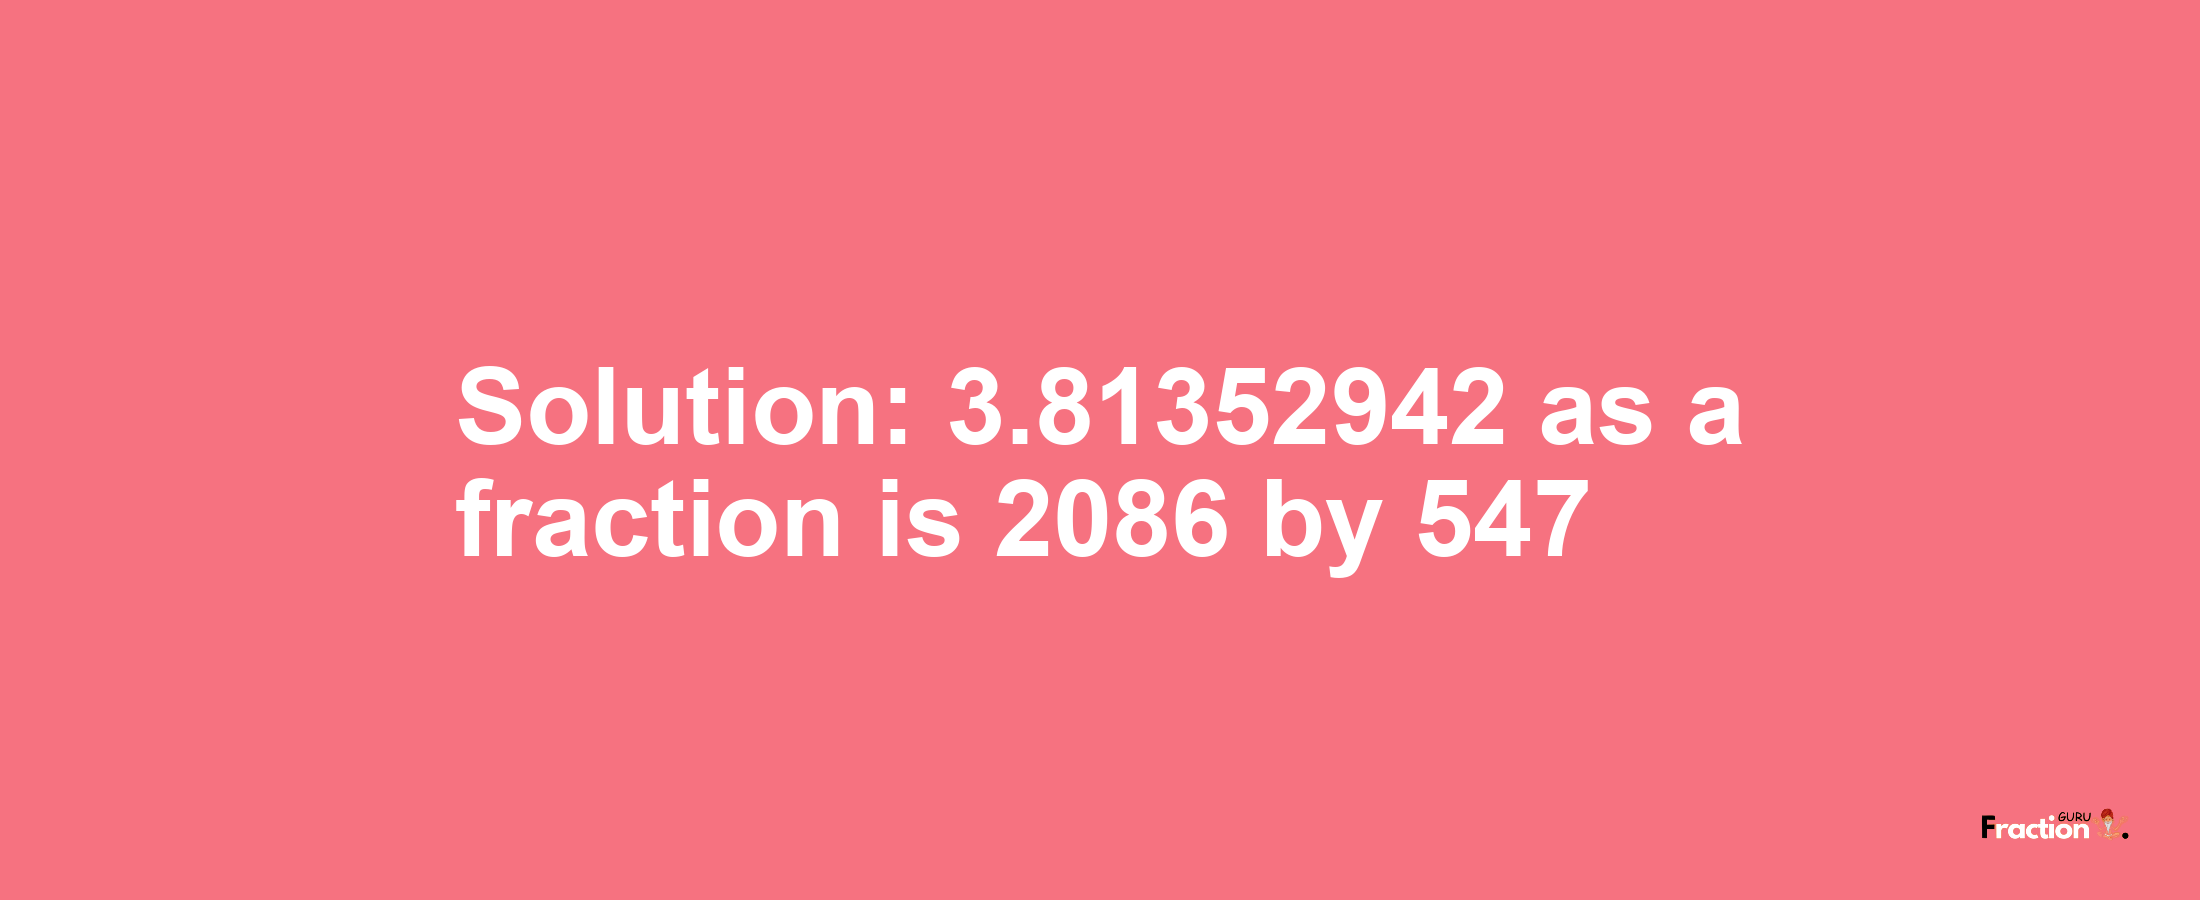 Solution:3.81352942 as a fraction is 2086/547